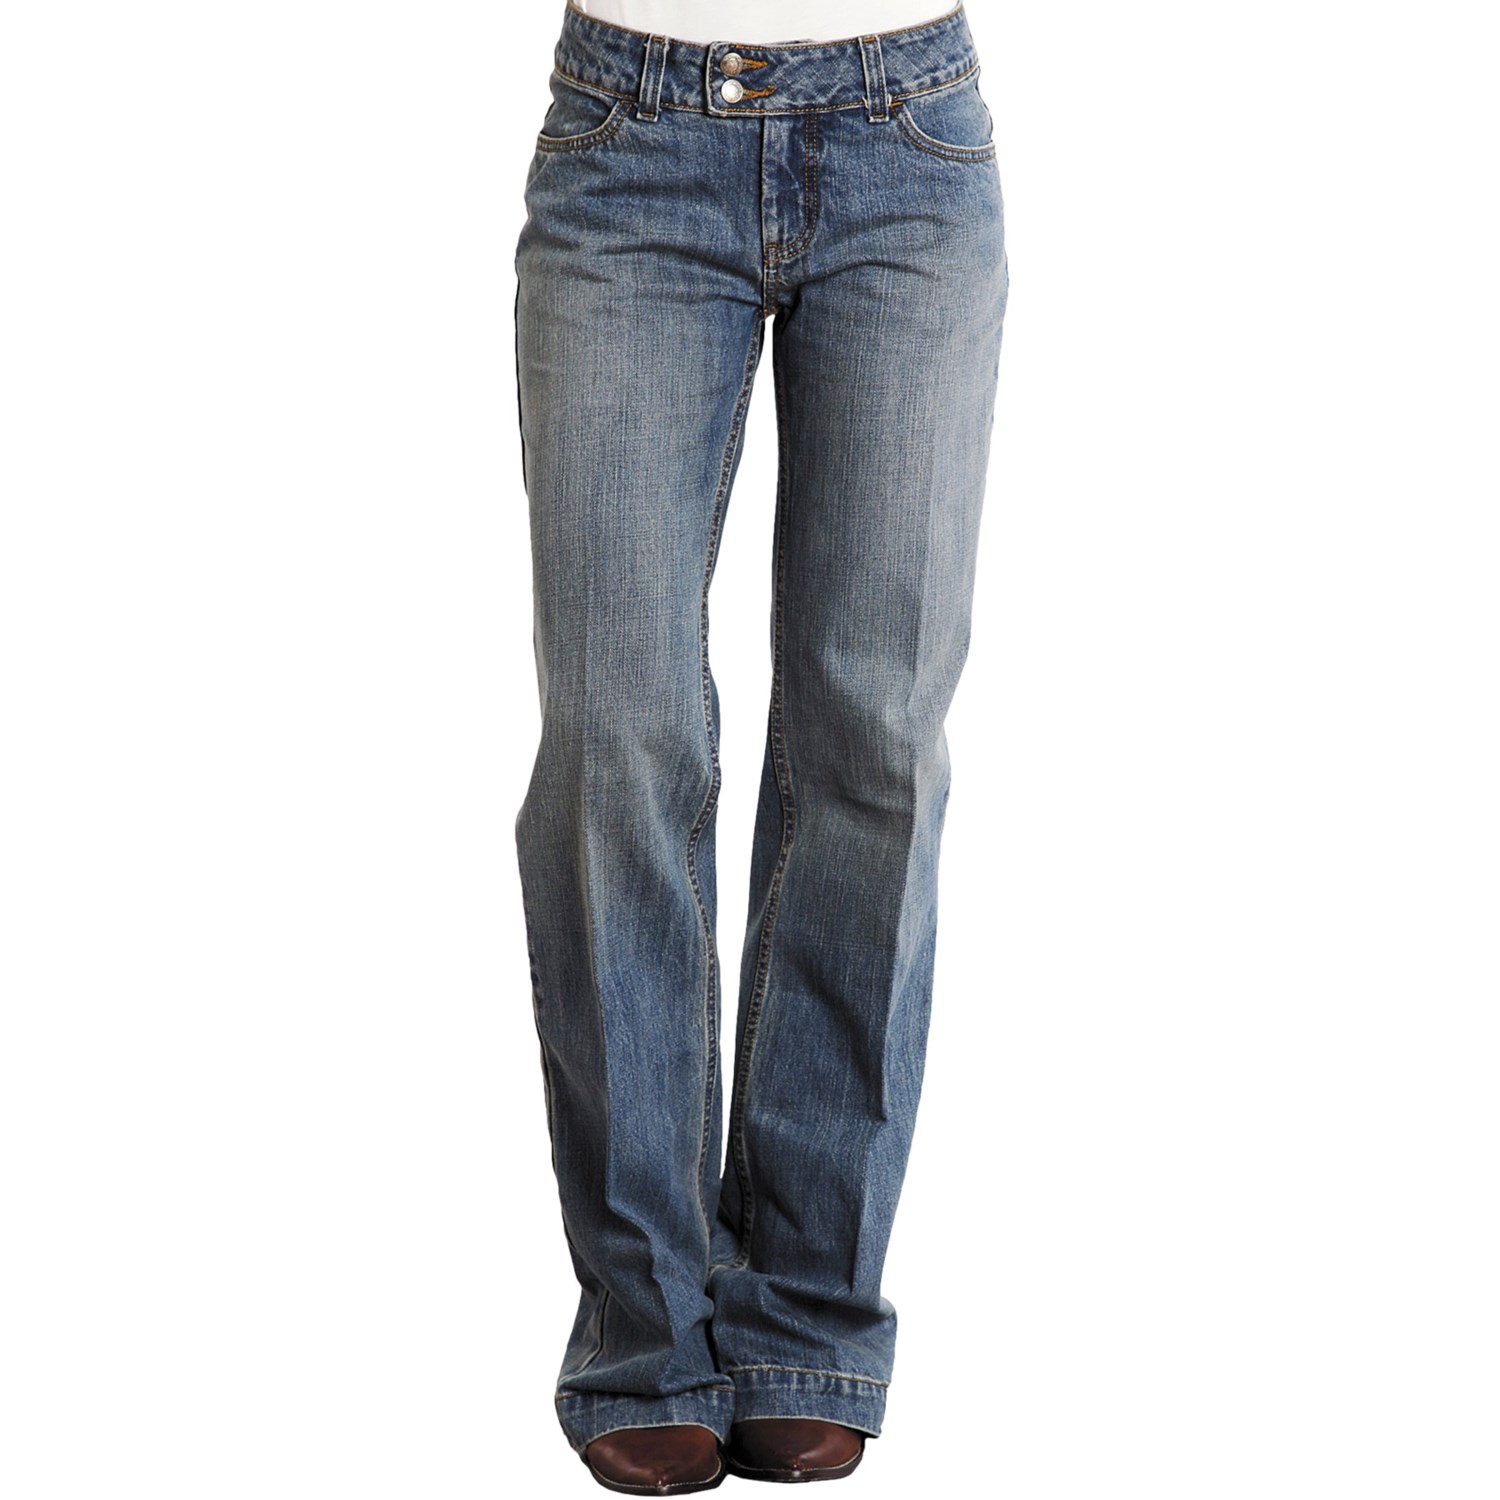 Stetson City Trouser Jeans (For Women) 7100U - Save 38%